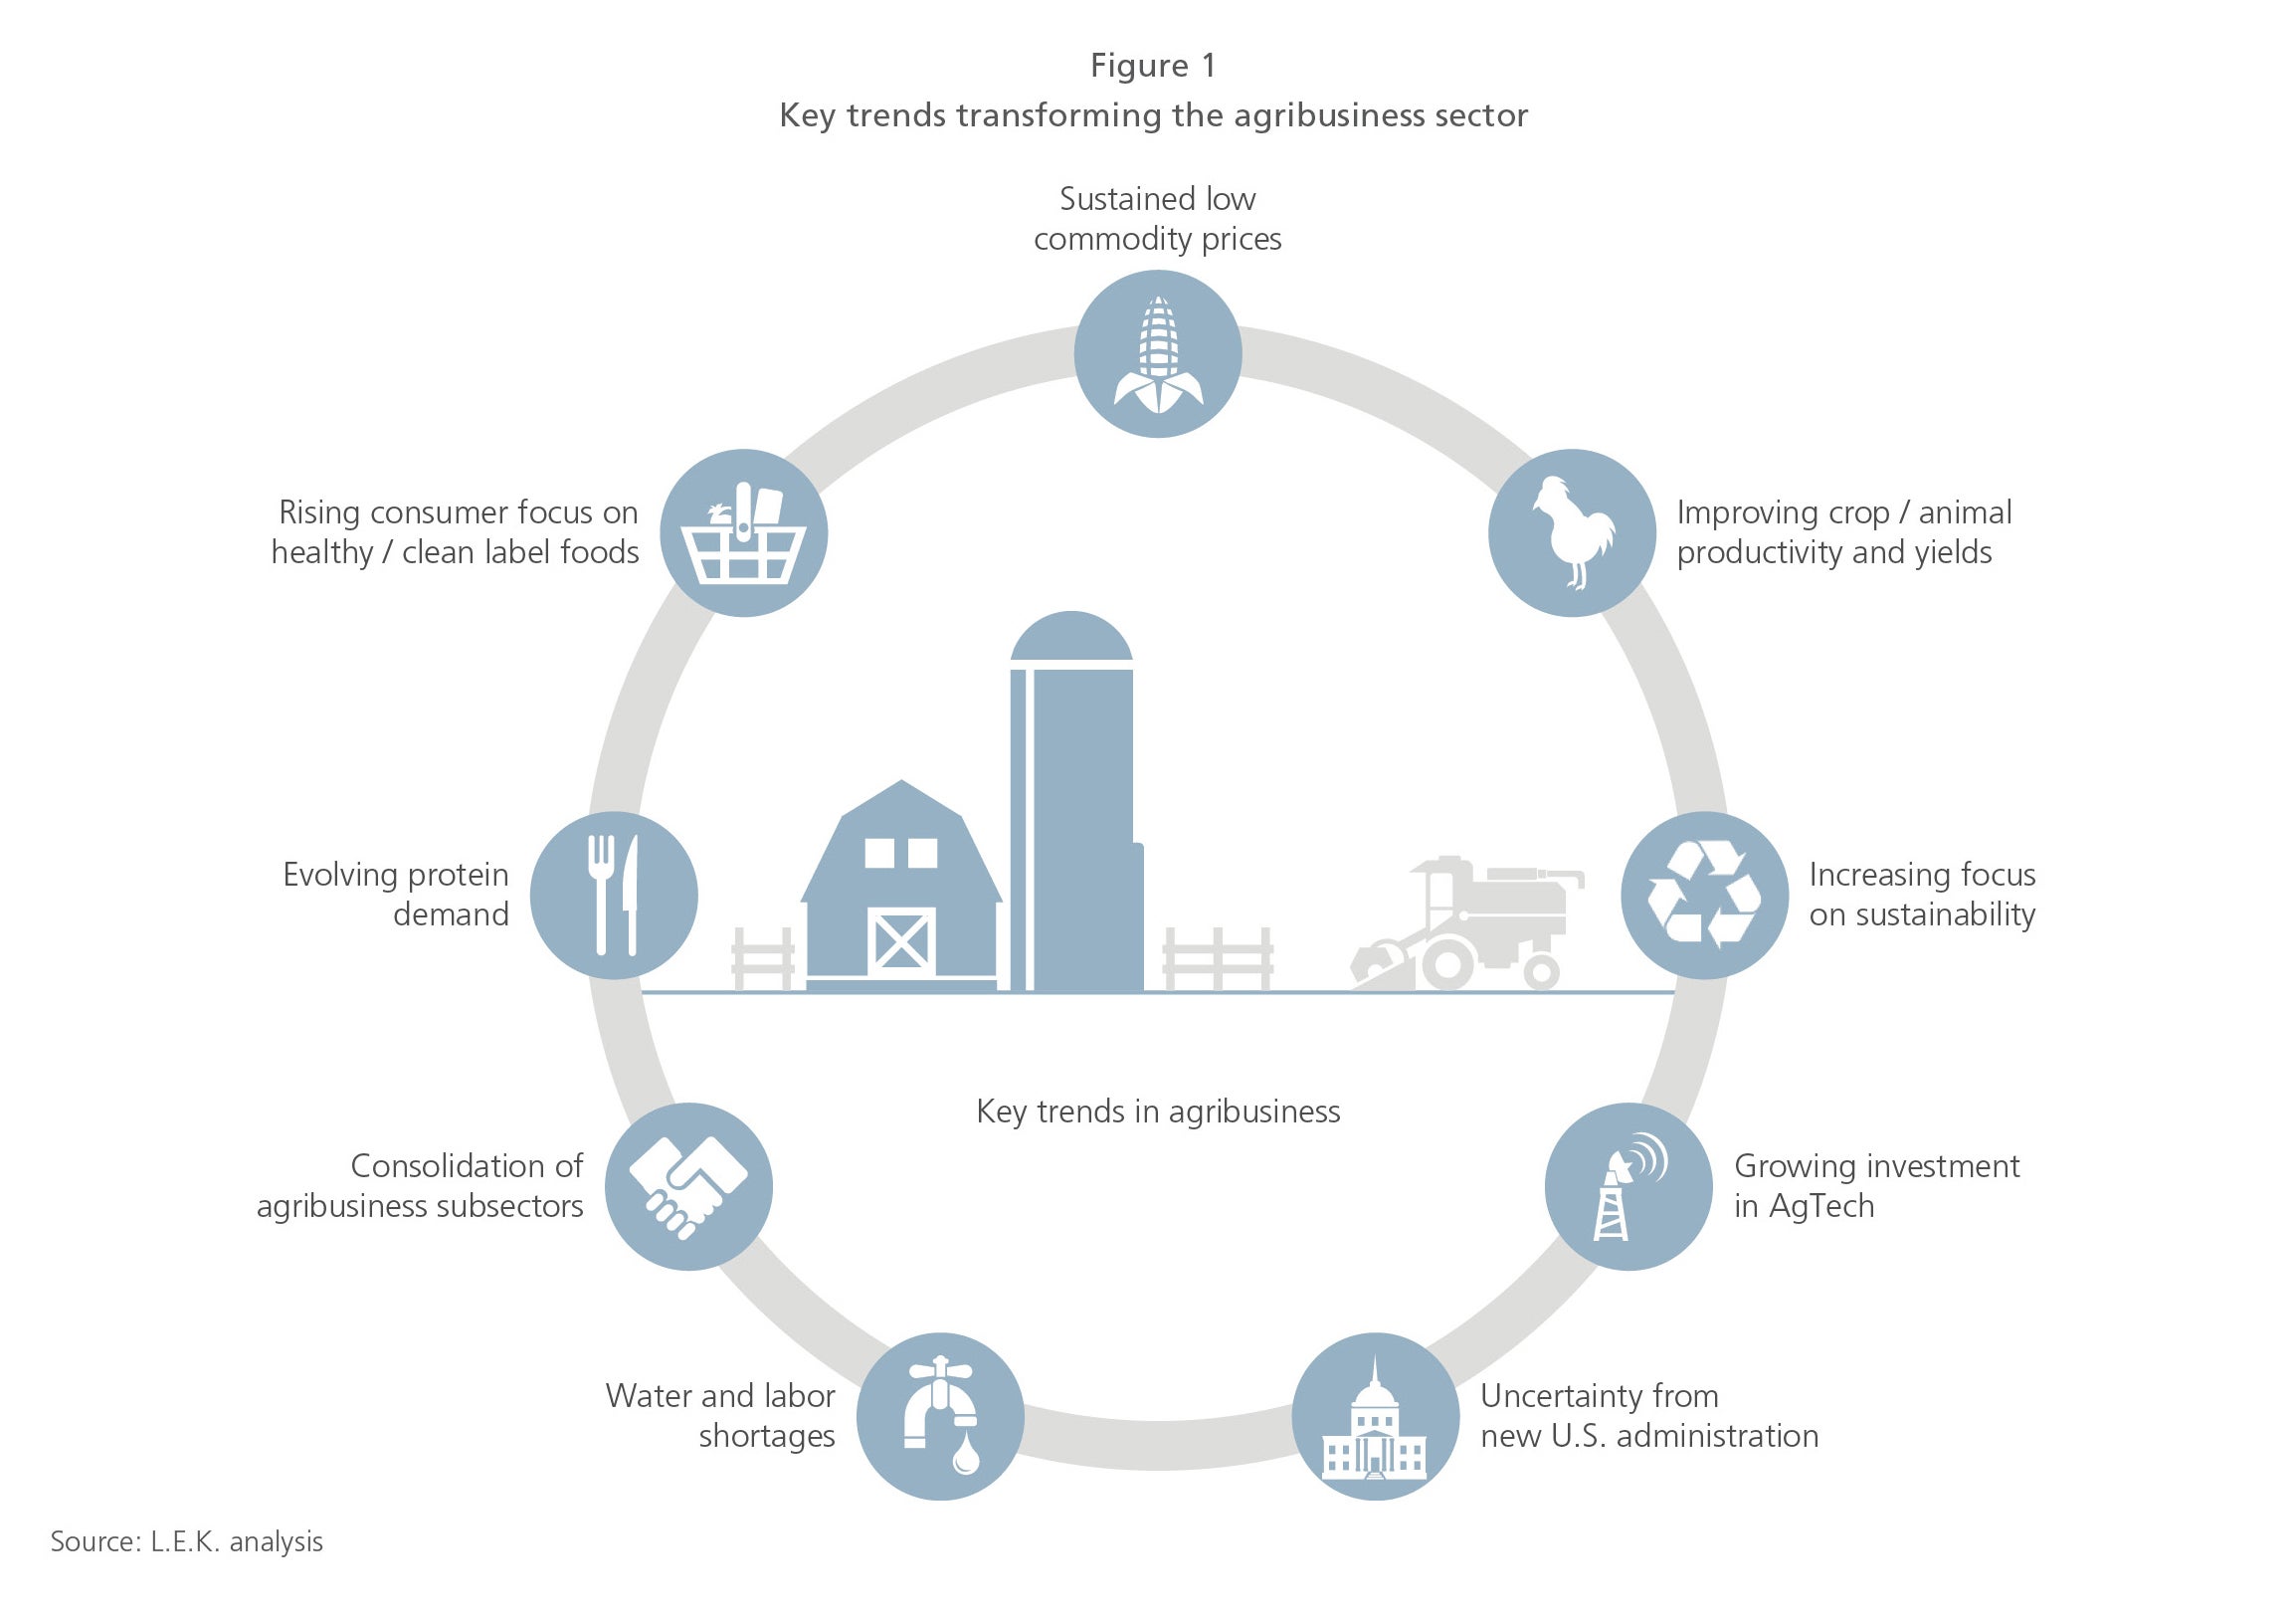 Key trends transforming the agribusiness sector